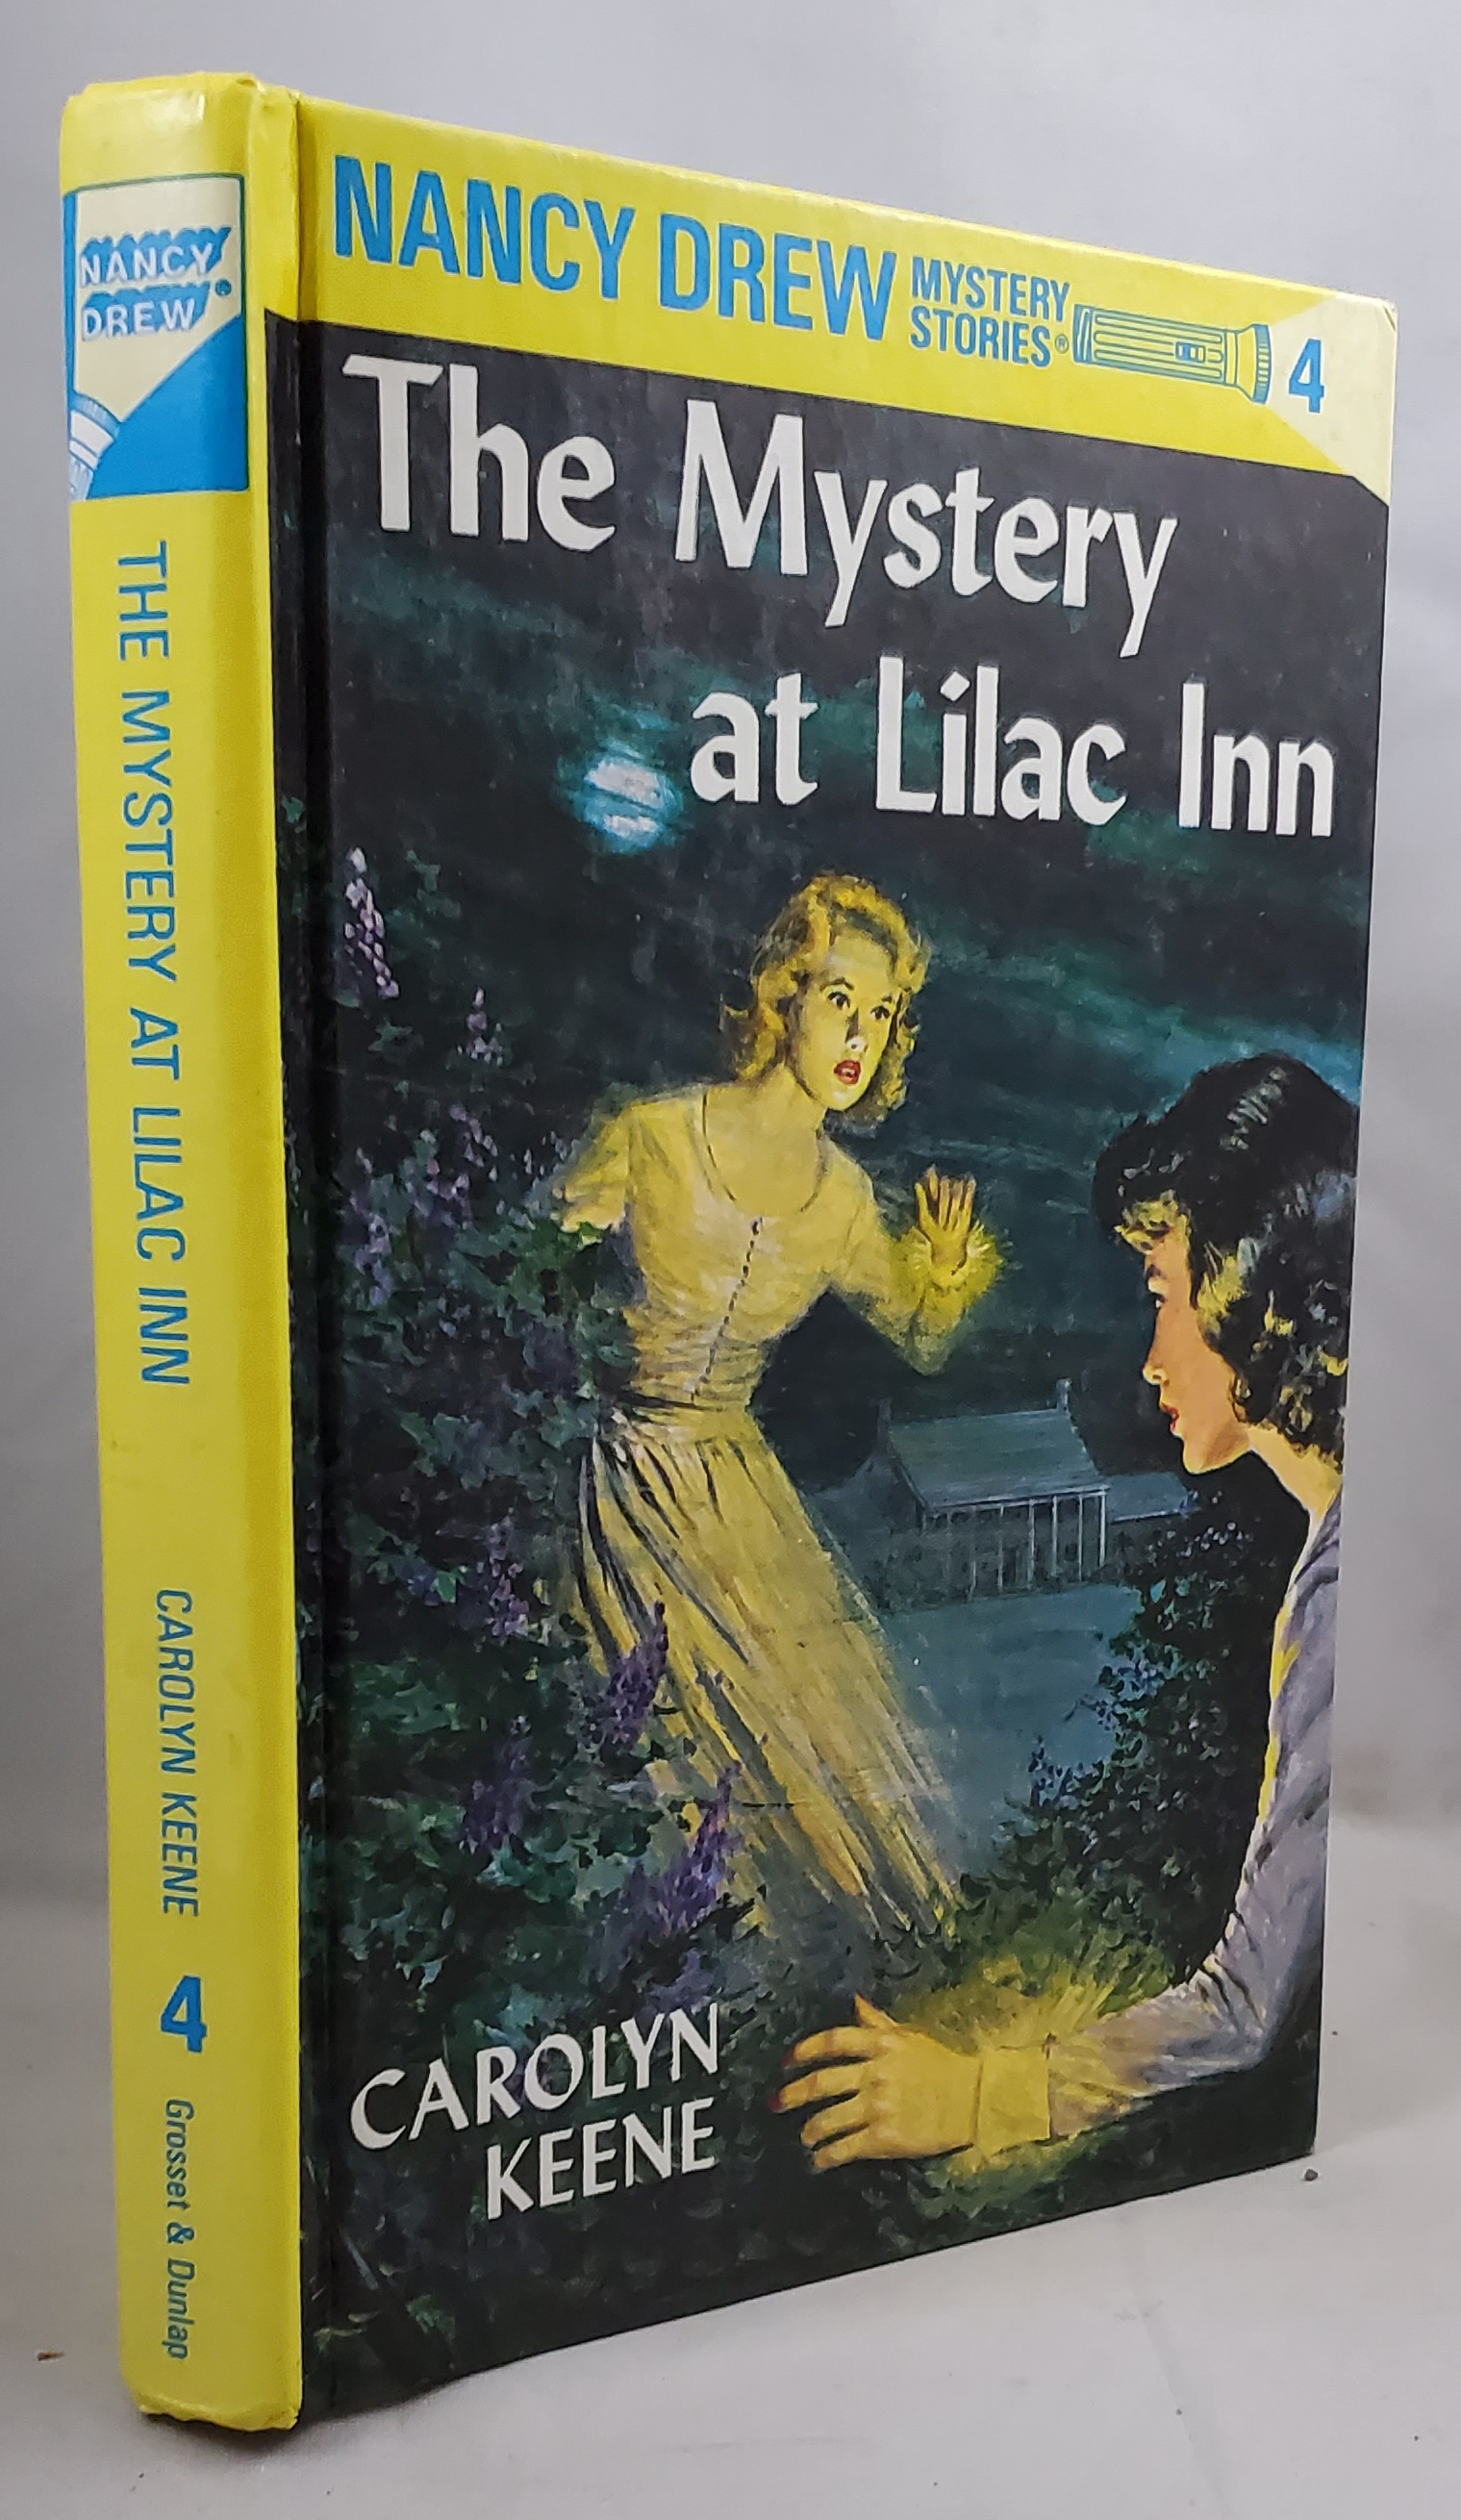 Nancy Drew and the mystery at lilac inn